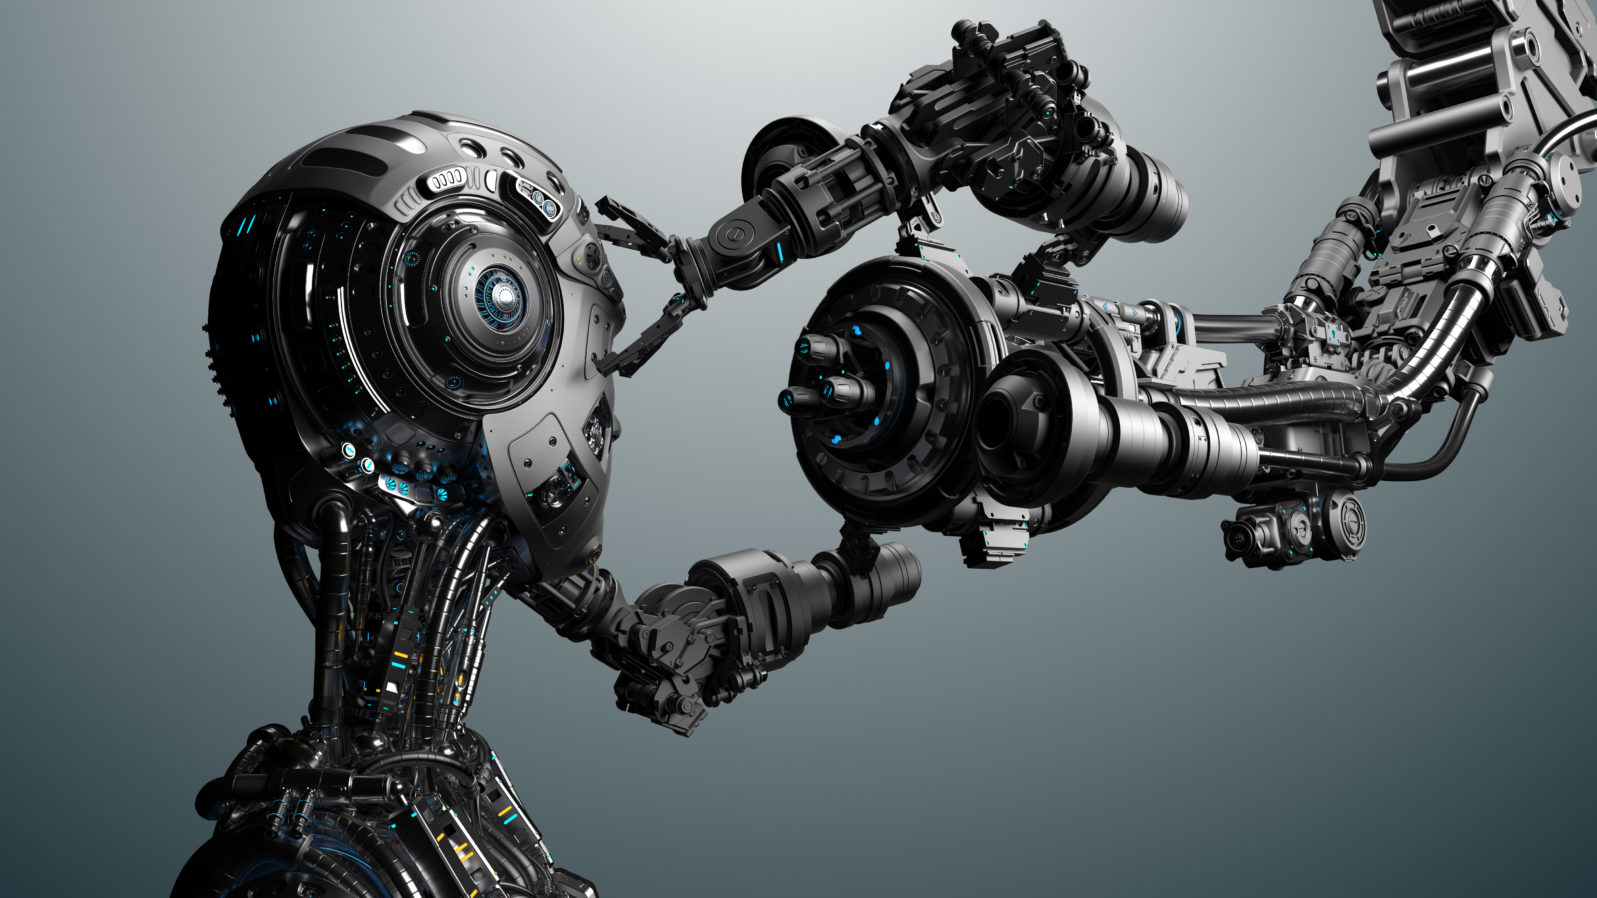 Futuristic robot man being constructed by robotic arm or cyborg under construction. Isolated on background. 3D illustration.